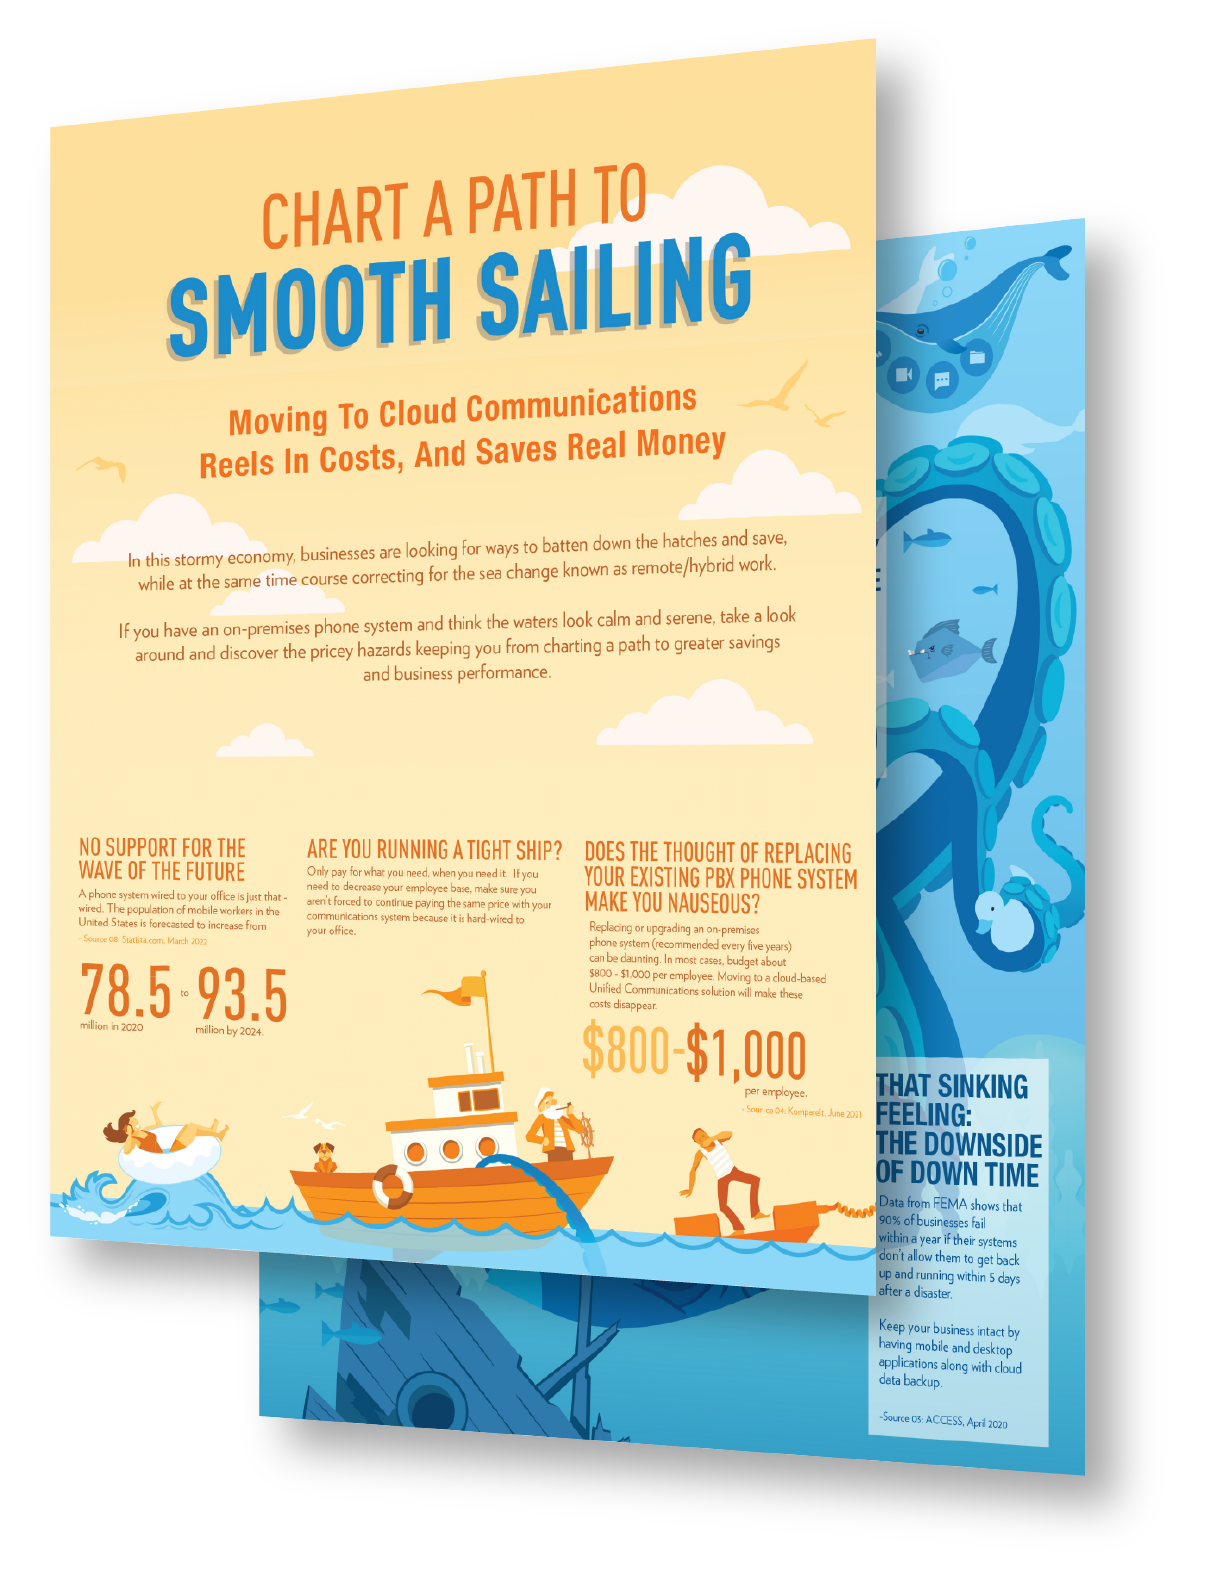 Elevate_Managed-Voice_Smooth-Sailing-Banners_Handout-Img